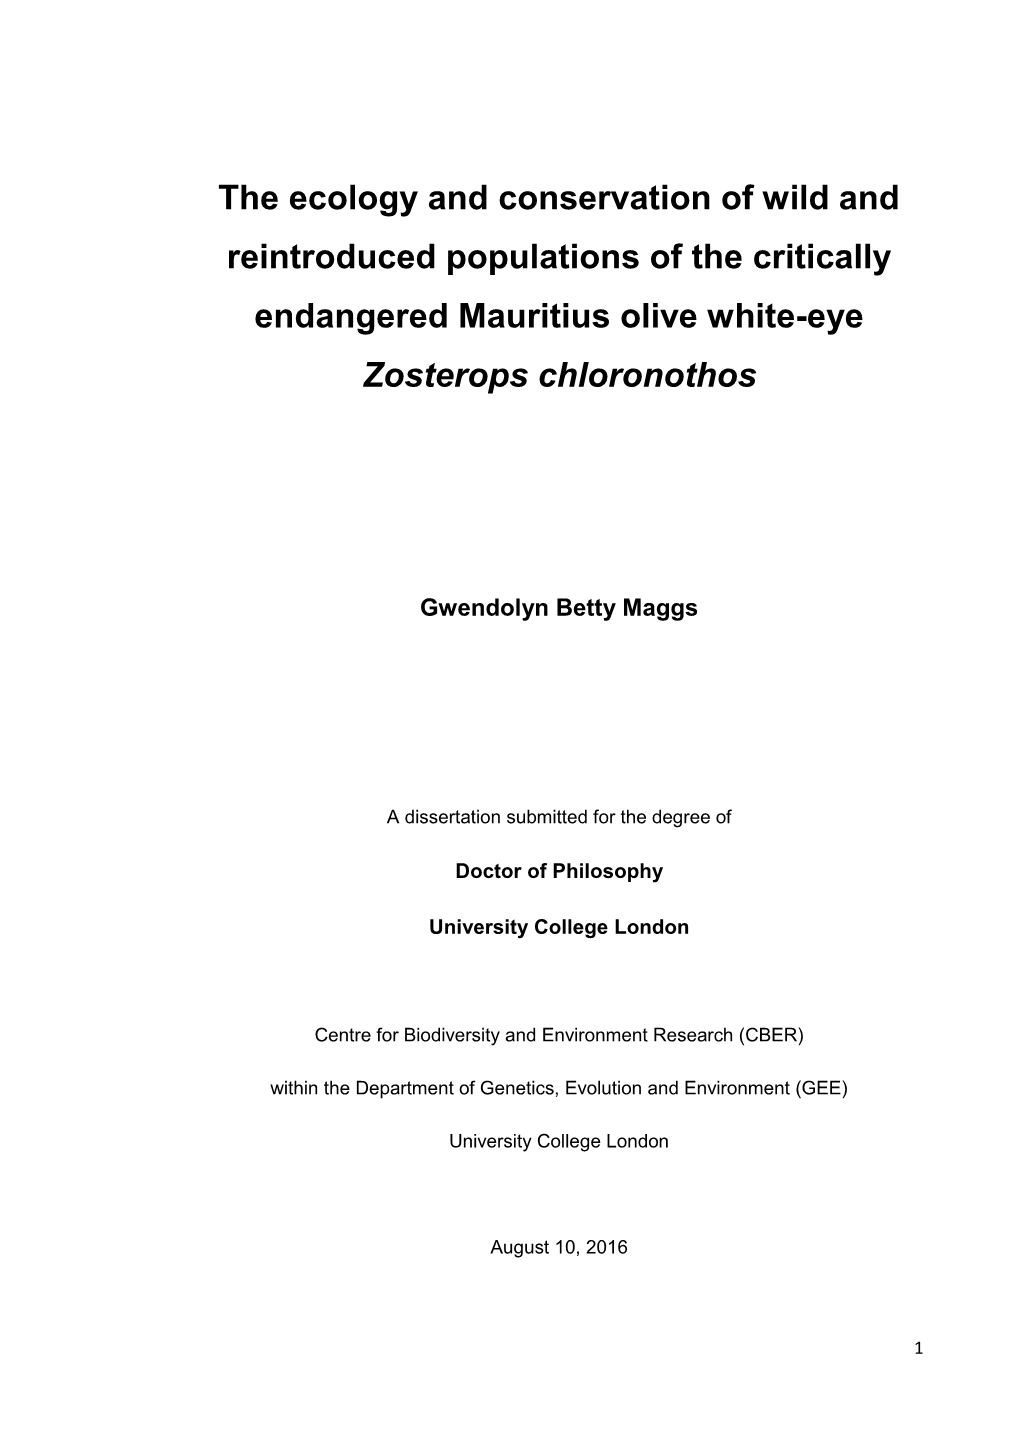 The Ecology and Conservation of Wild and Reintroduced Populations of the Critically Endangered Mauritius Olive White-Eye Zosterops Chloronothos